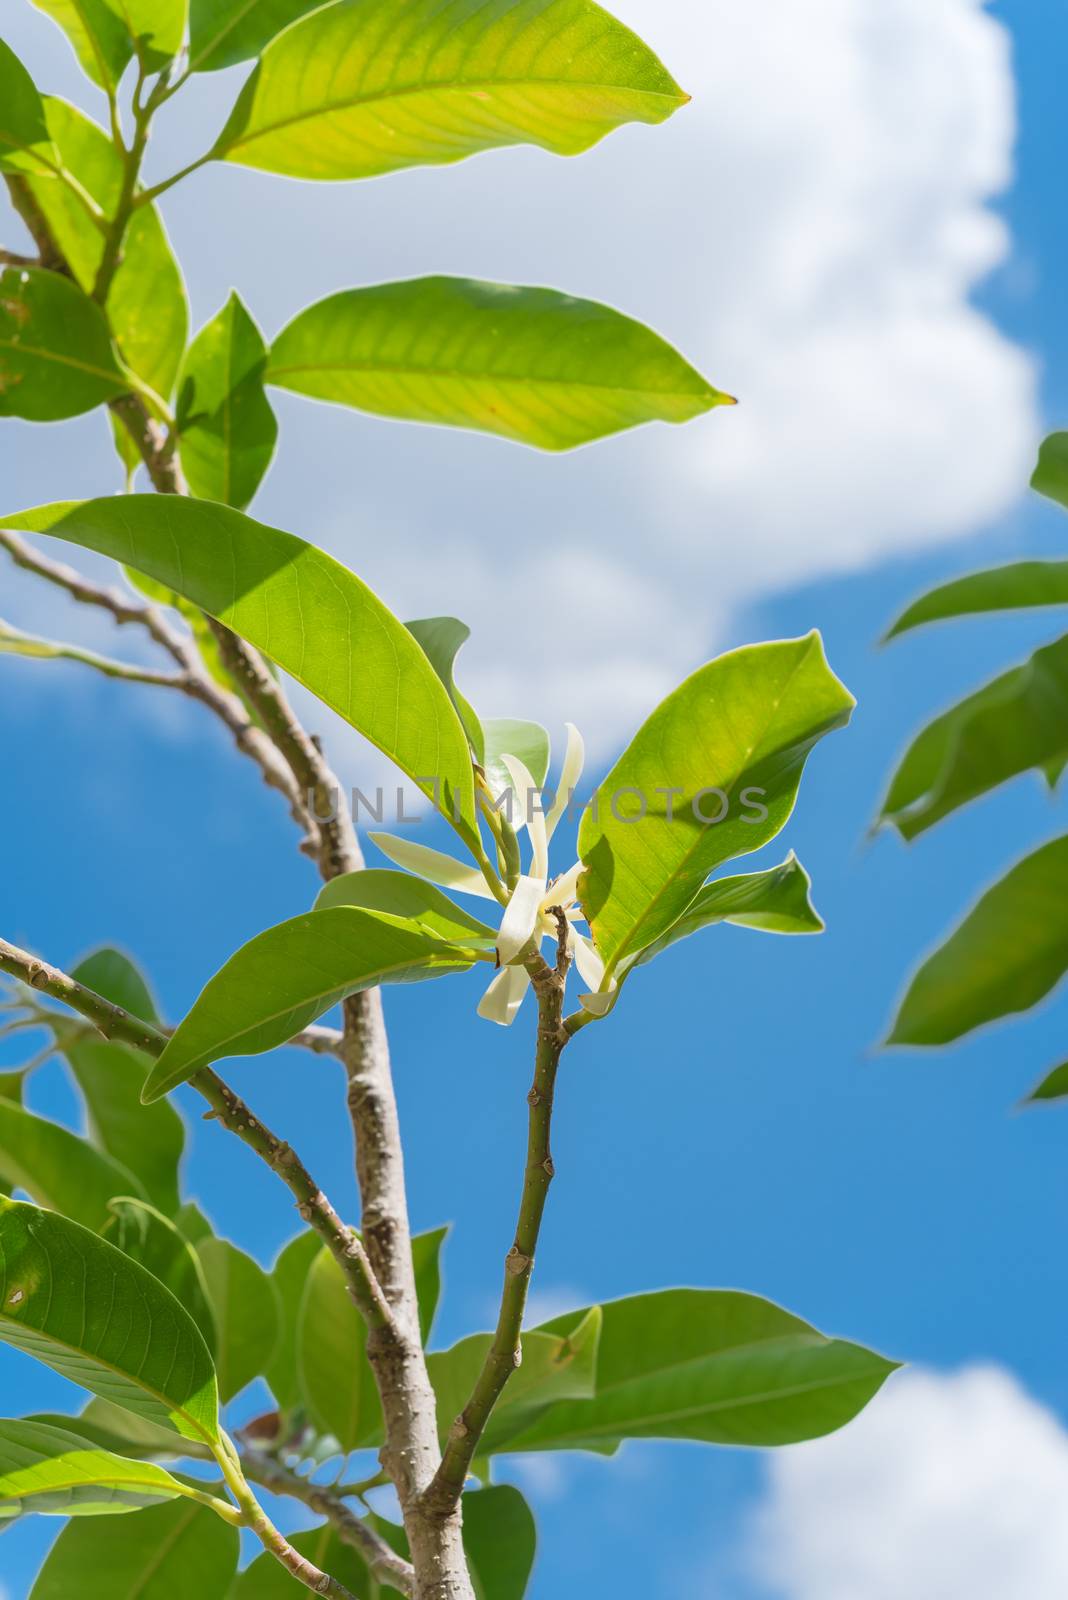 Look up view of blooming Cananga odorata Ylang-ylang flower under cloud blue sky. Blooming fragrant cananga, or perfume tree known as a tropical plant that native to India